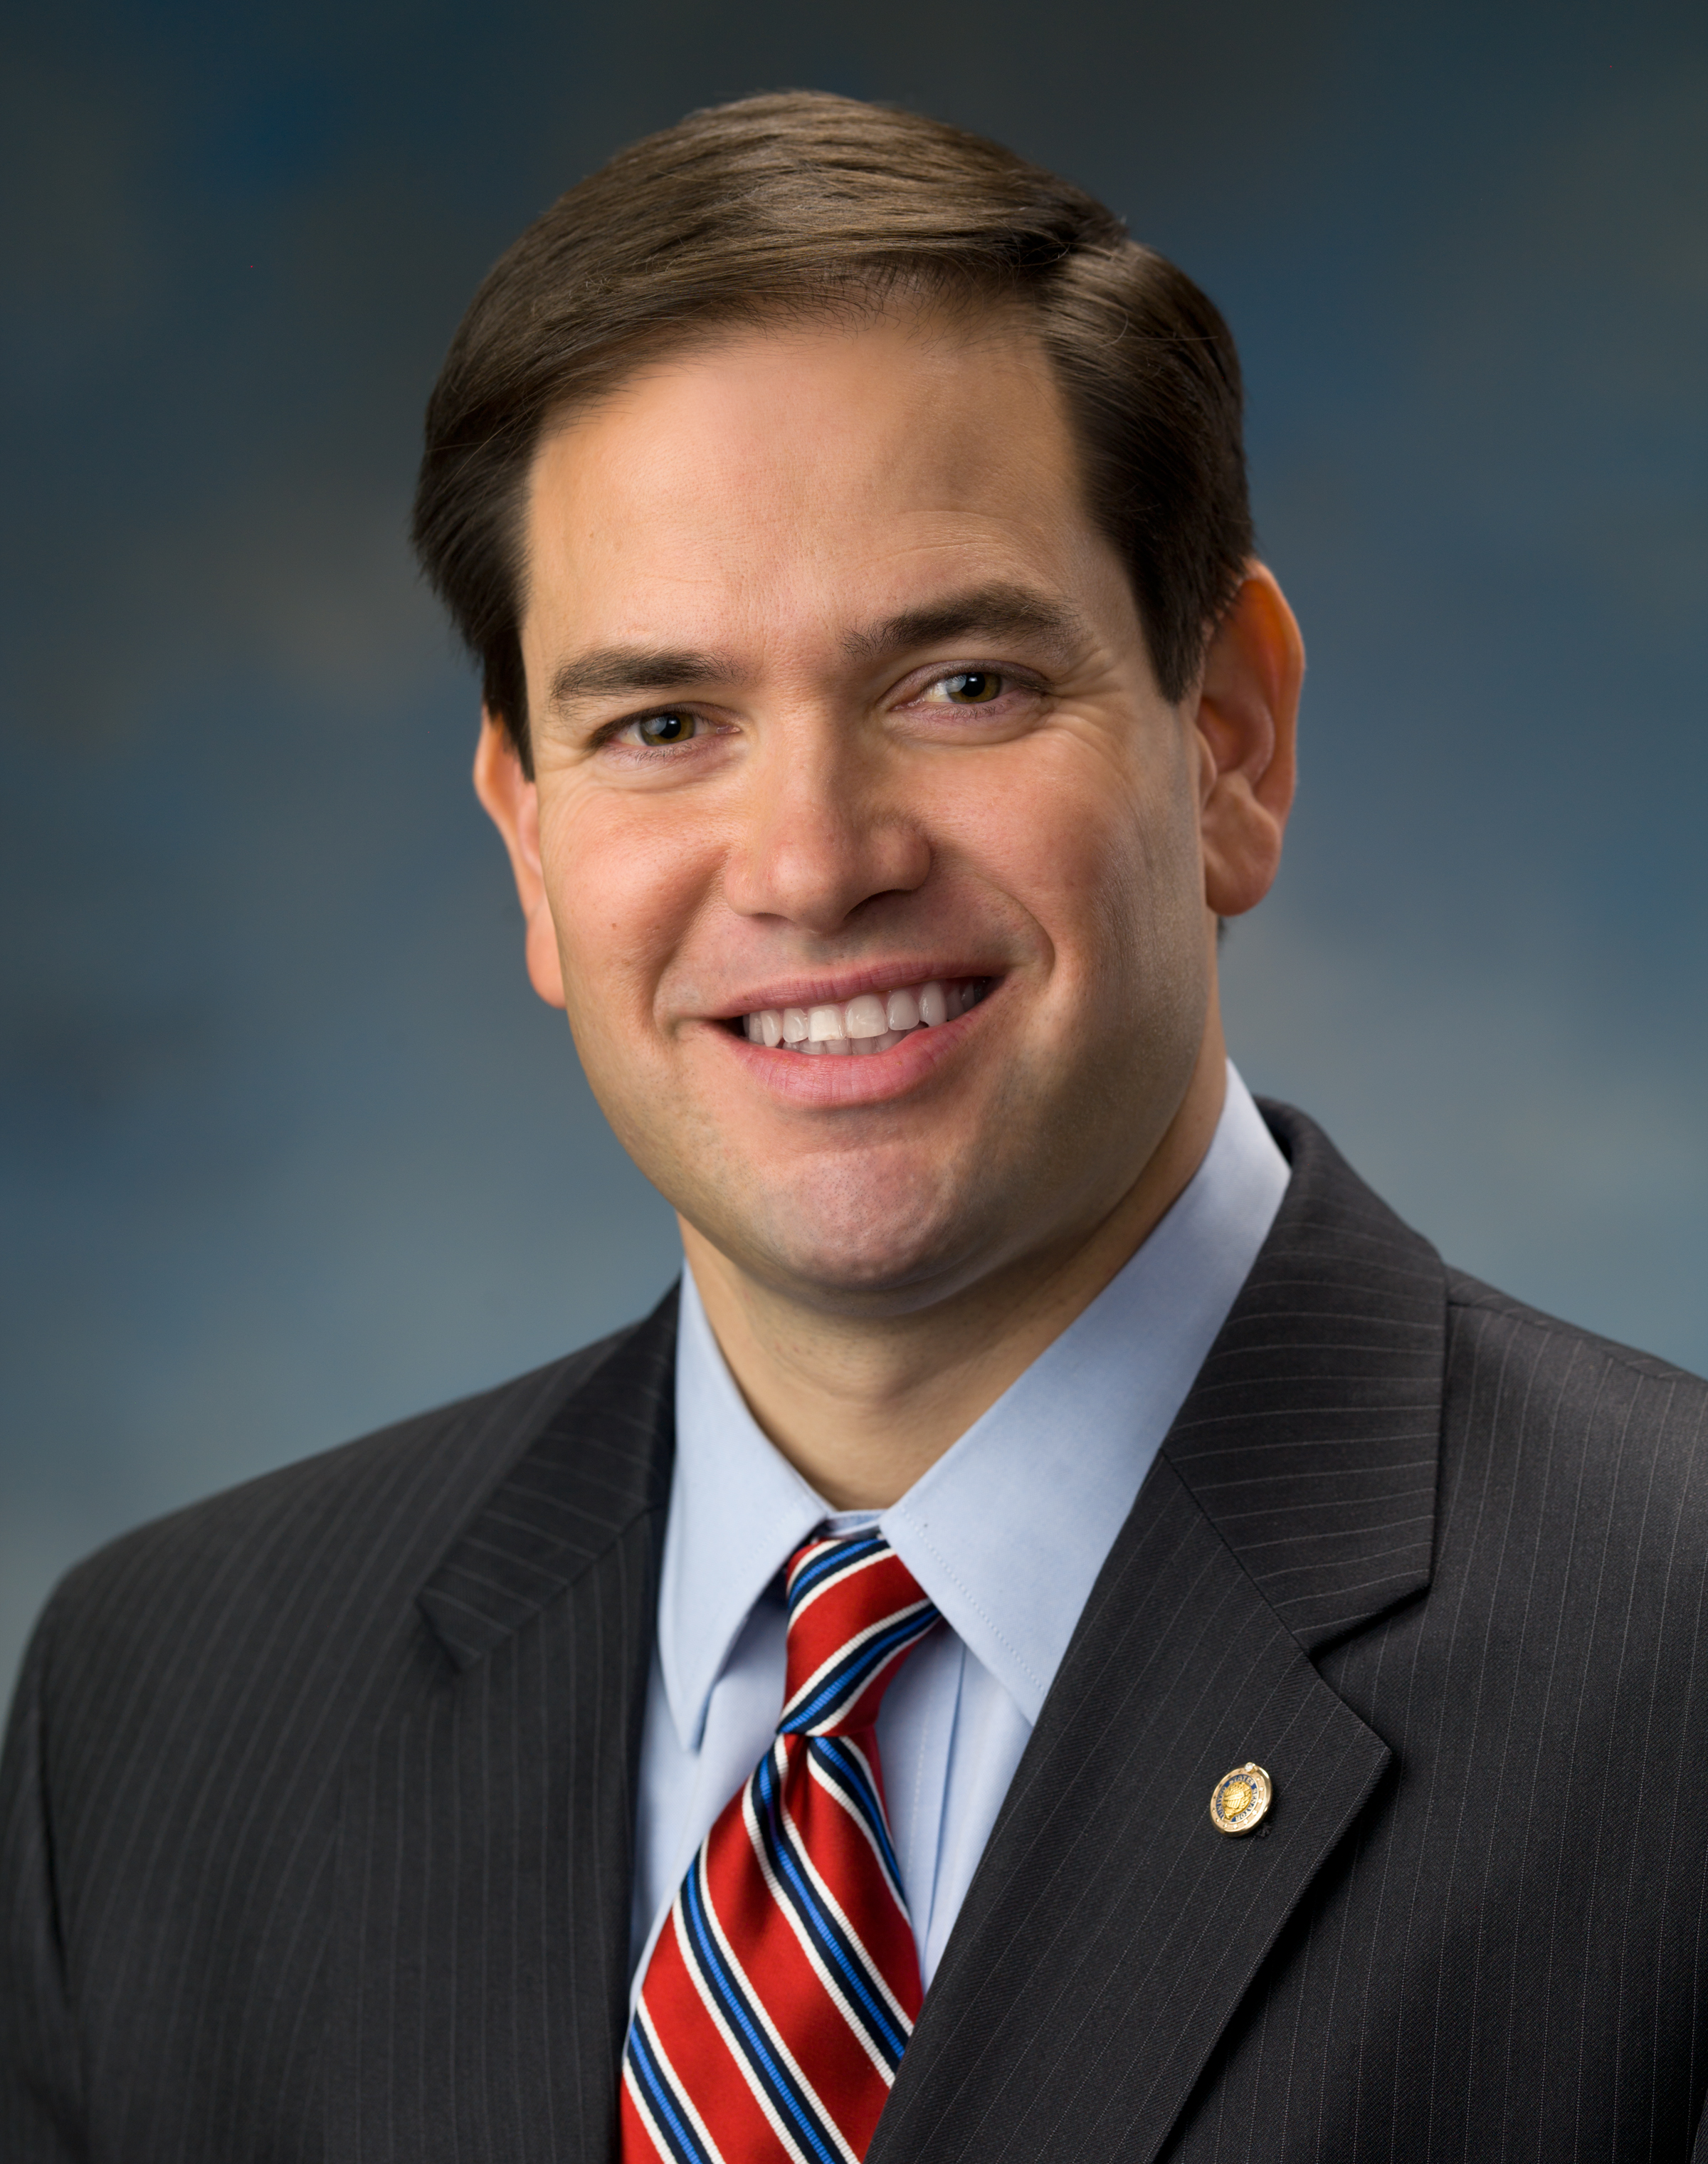 http://upload.wikimedia.org/wikipedia/commons/7/79/Marco_Rubio%2C_Official_Portrait%2C_112th_Congress.jpg